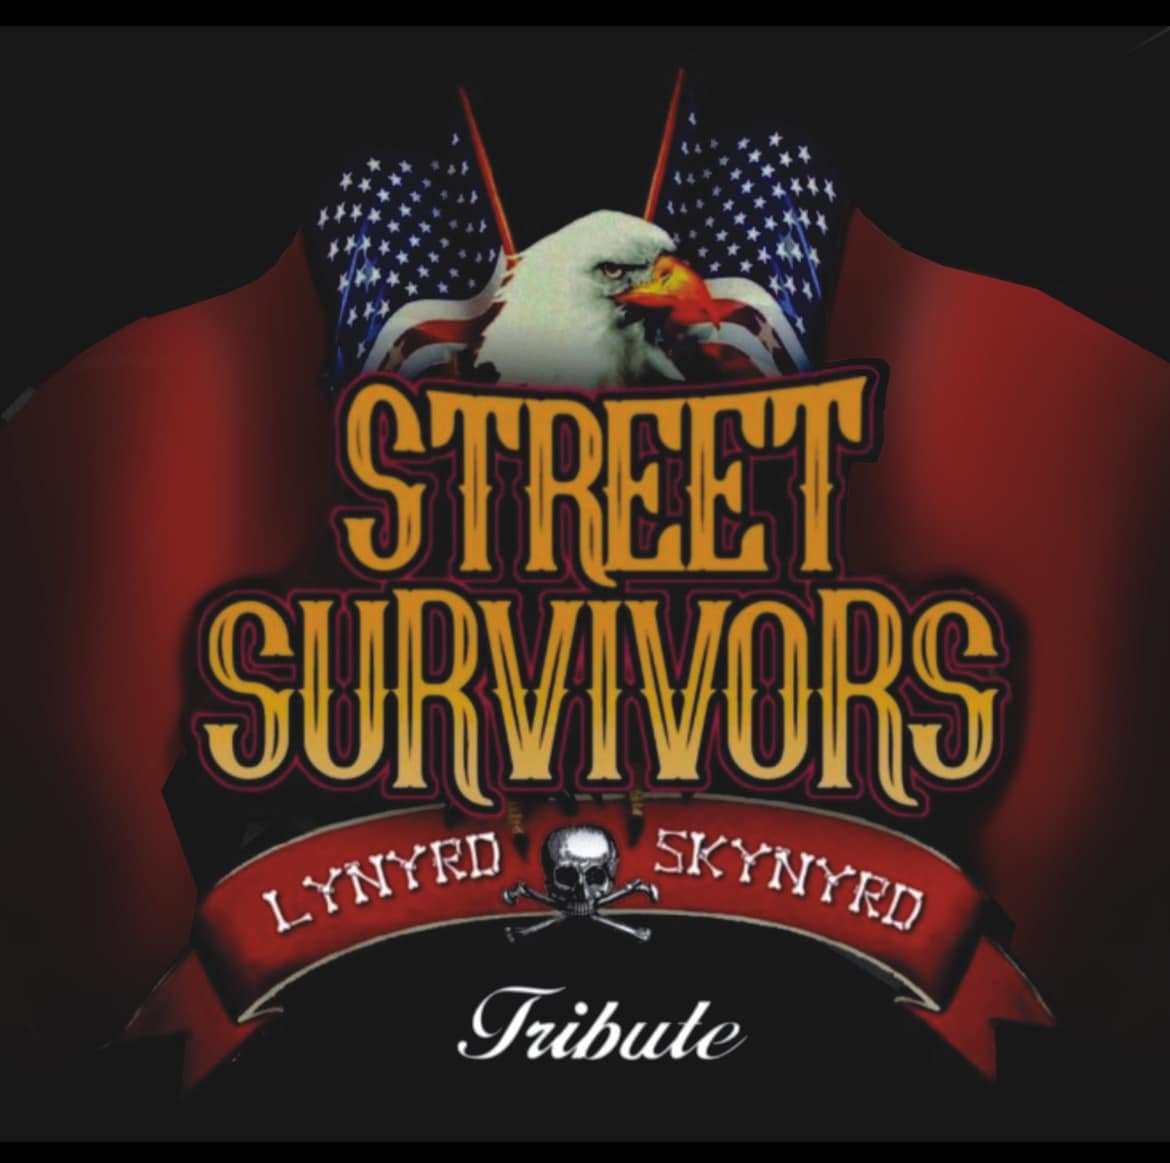 Live at Sessions - Street Survivors Lynyrd Skynyrd Tribute Band